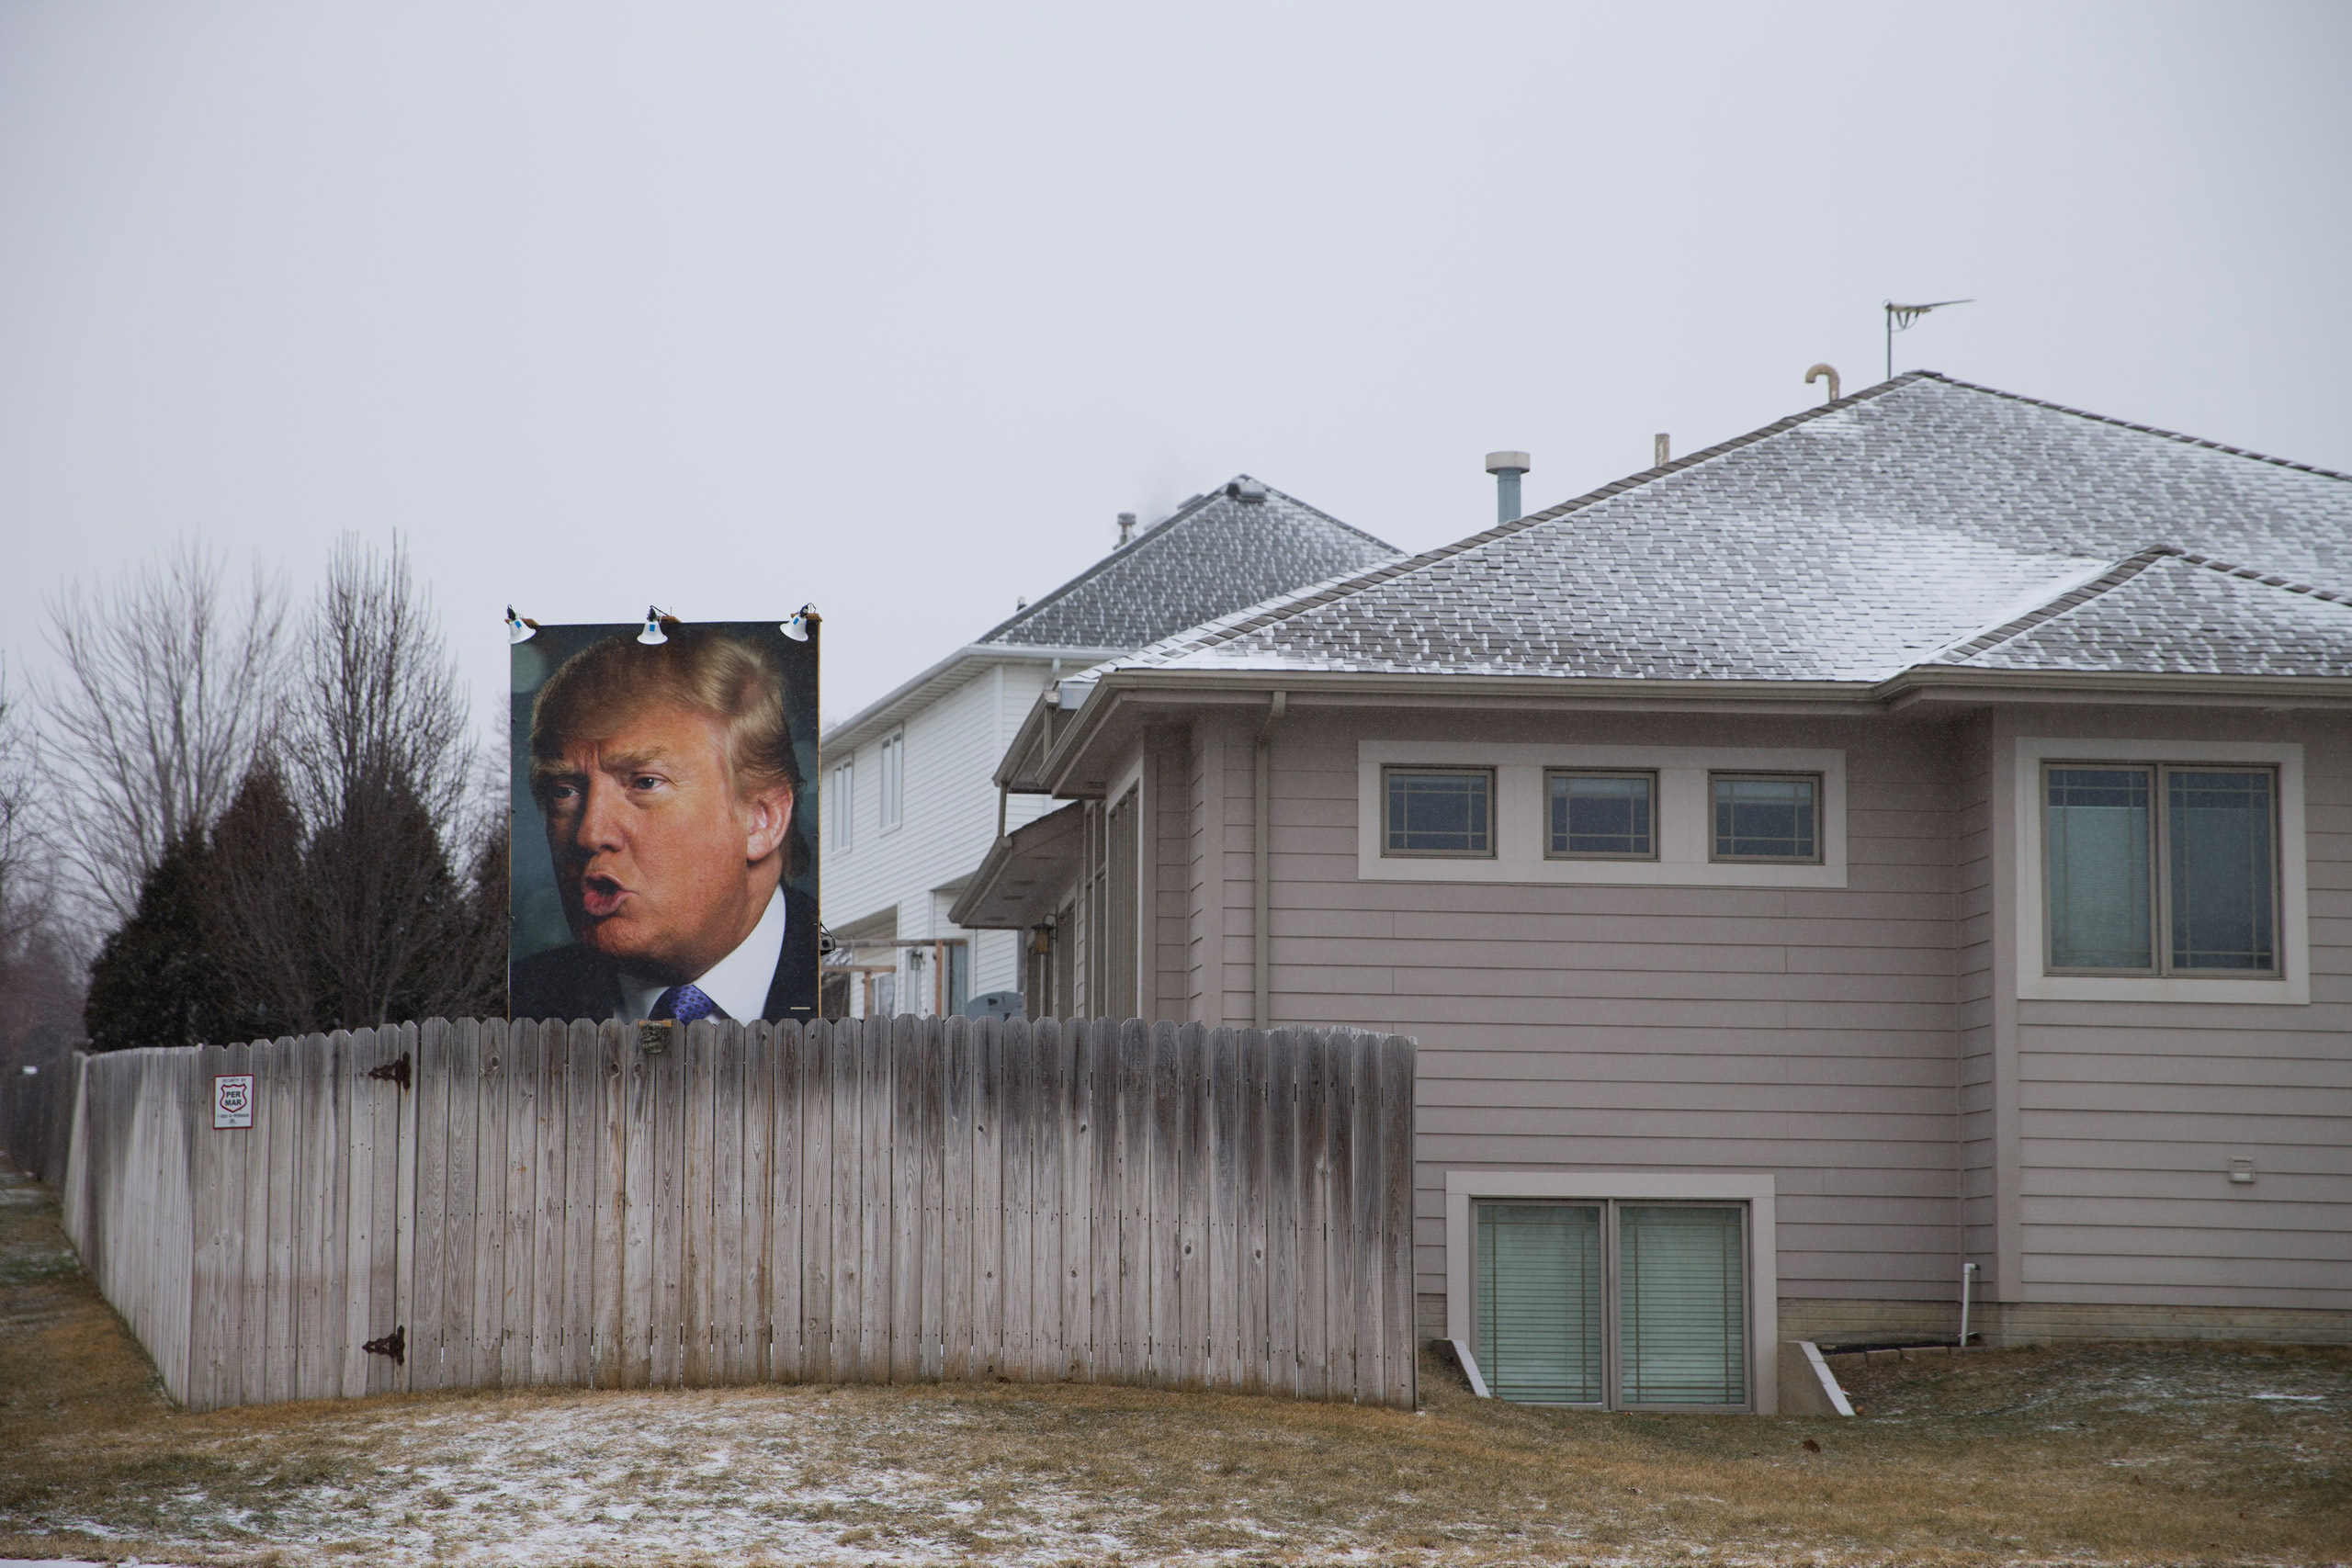 A photo of Republican presidential candidate Donald Trump hangs outside a home in West Des Moines, Iowa, on Jan. 19, 2016. (Jae C. Hong—AP)